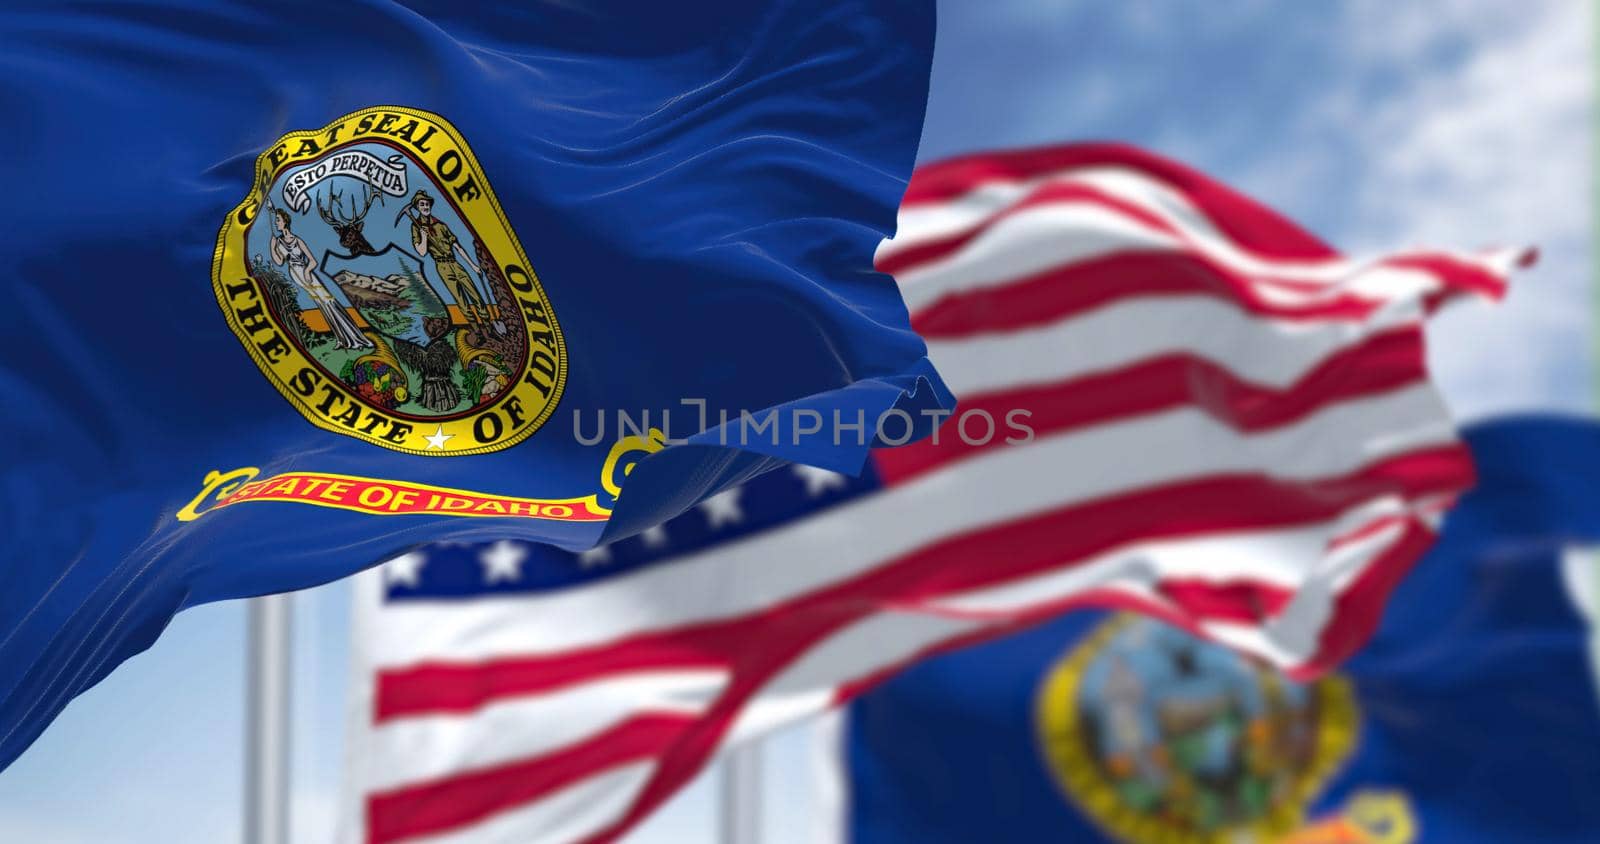 The Idaho state flag waving along with the national flag of the United States of America by rarrarorro